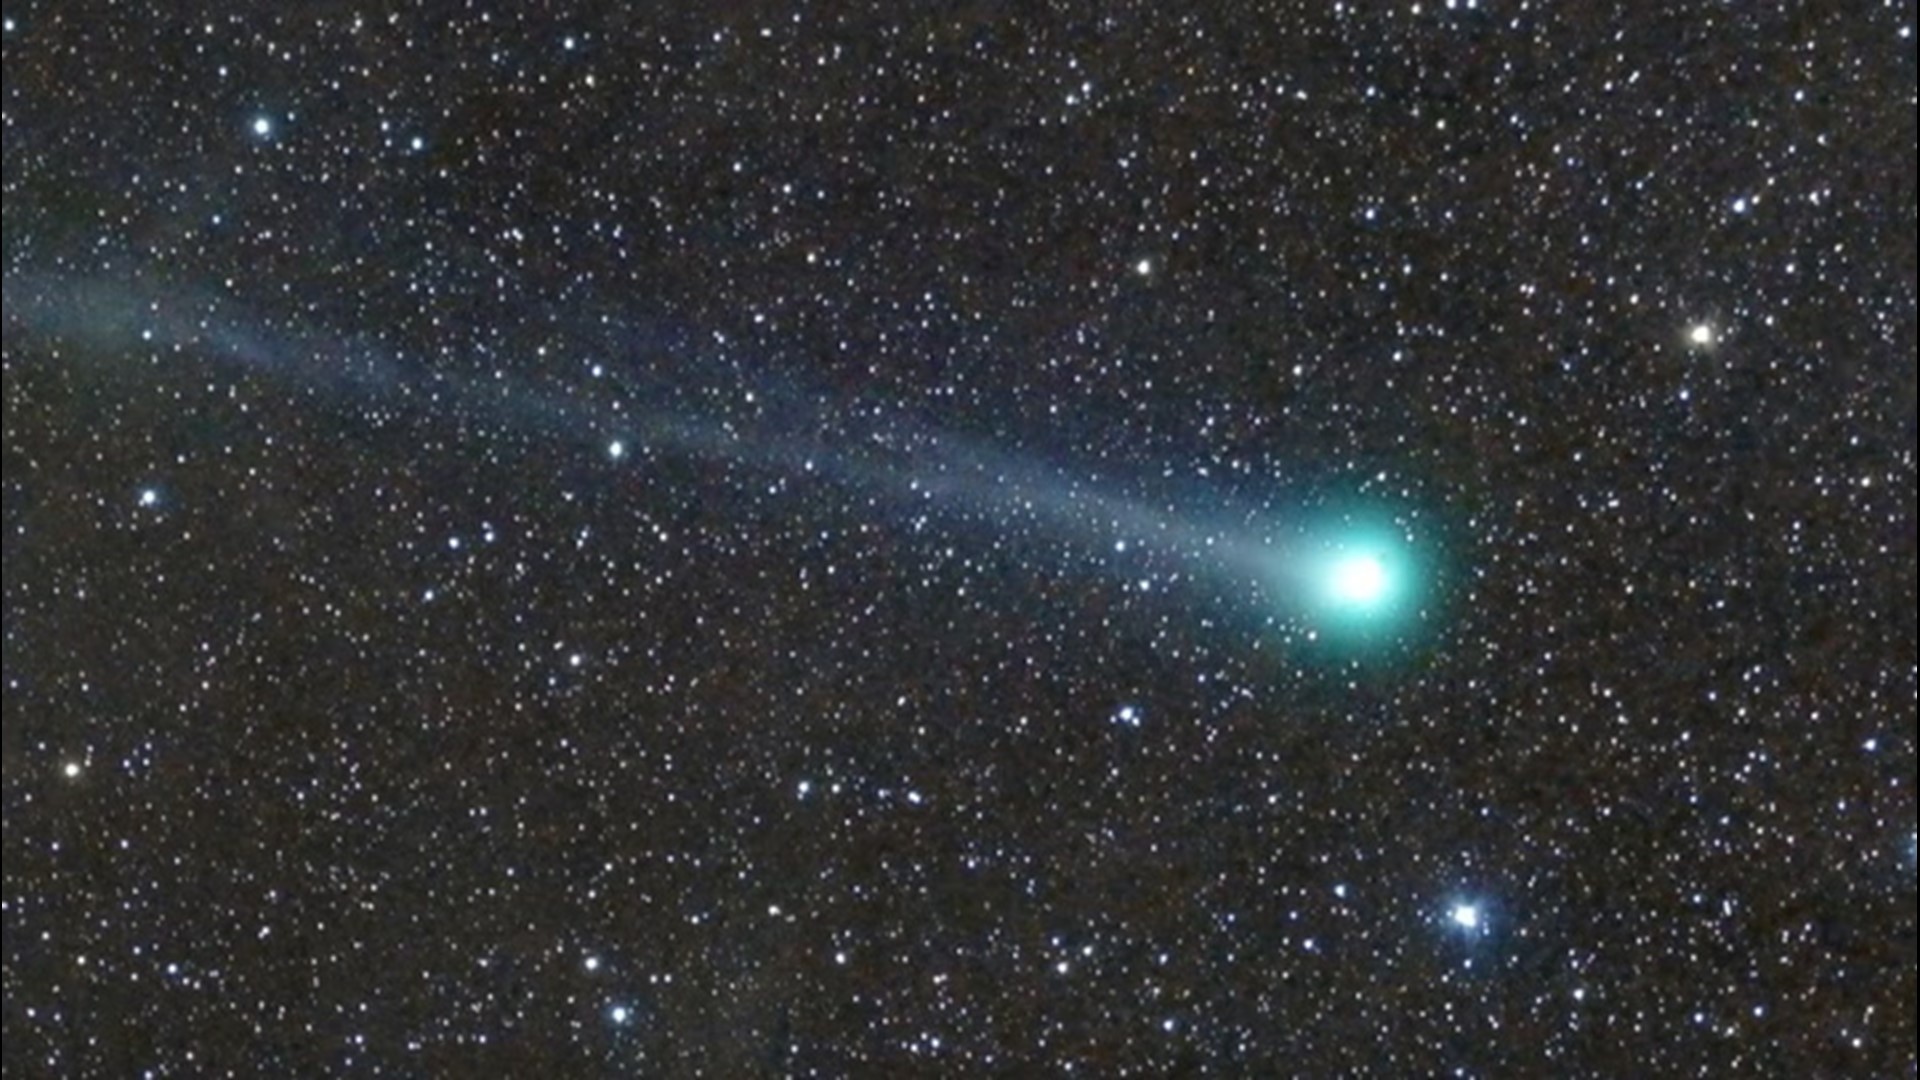 Here's how to see the comet SWAN